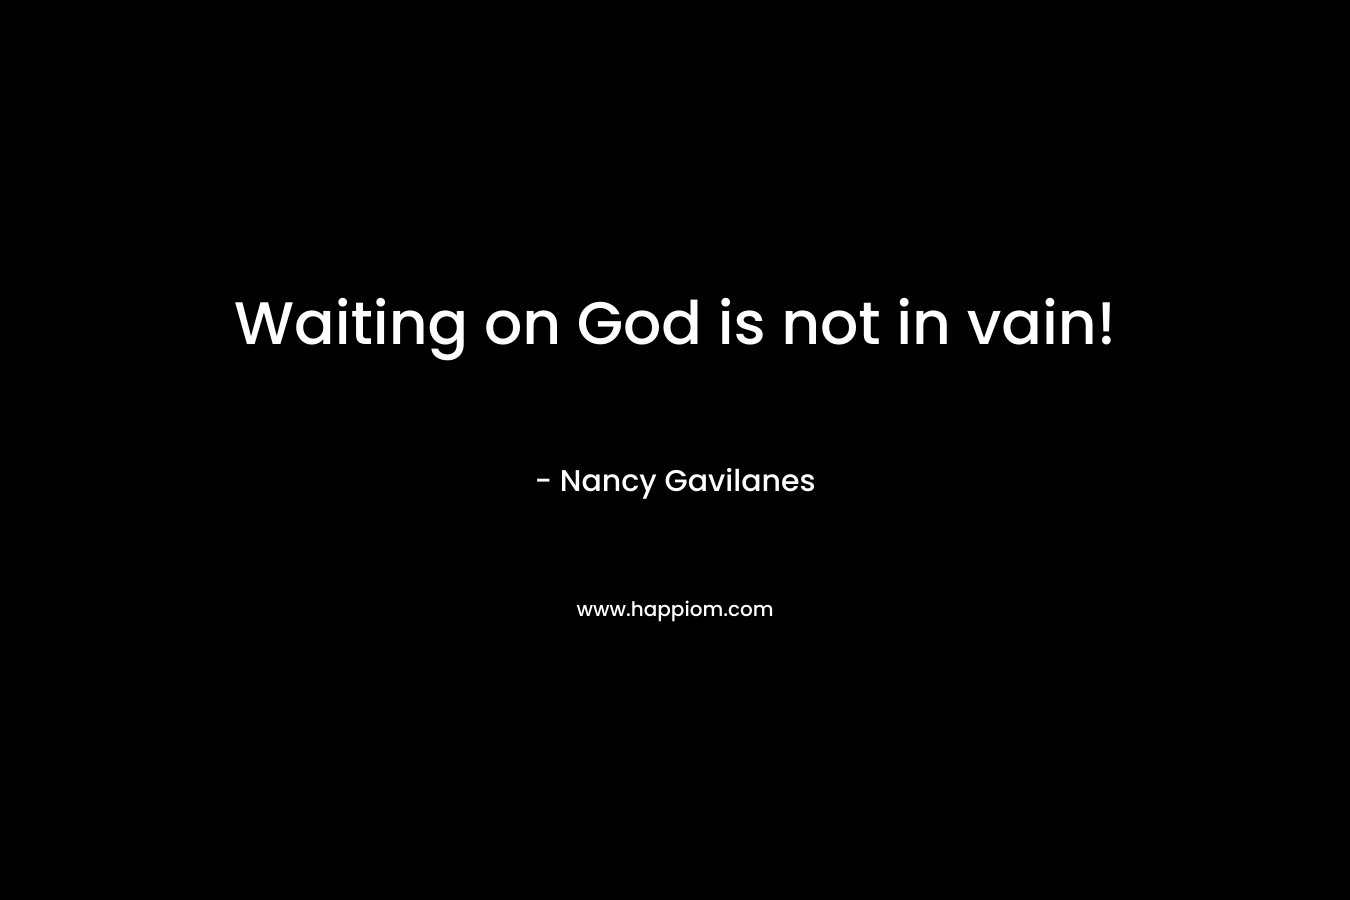 Waiting on God is not in vain!